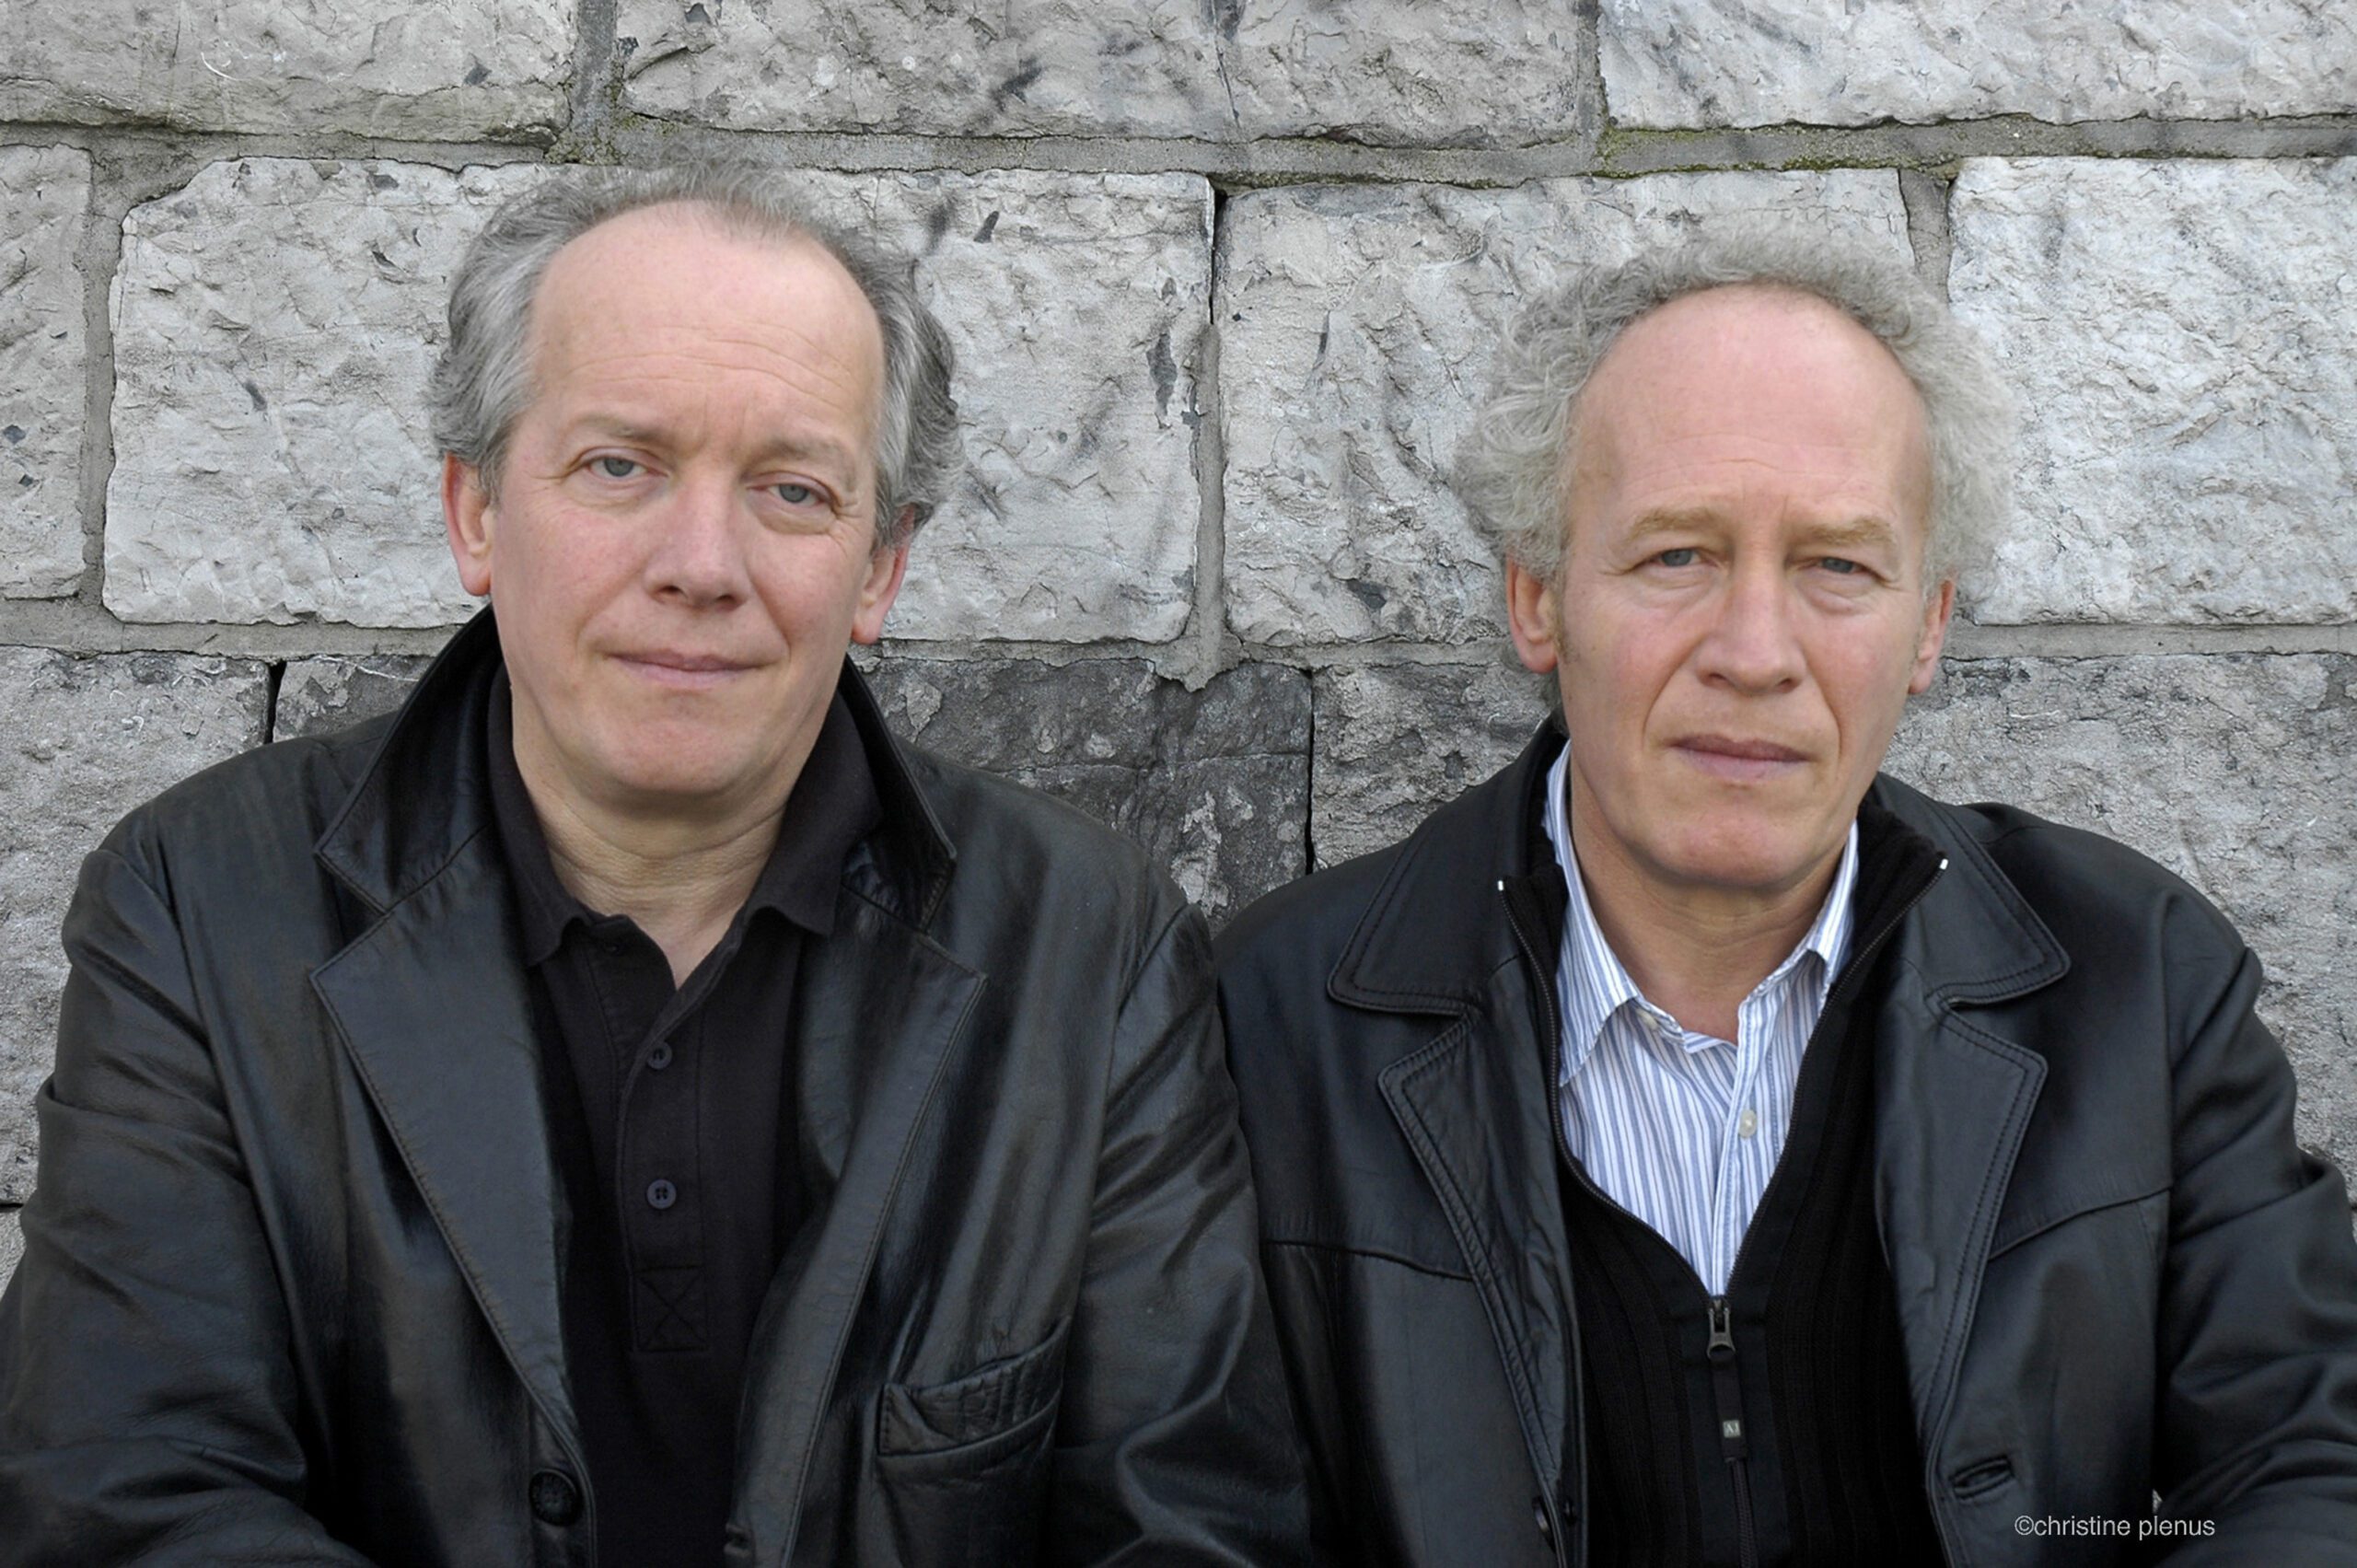 Directors Jean-Pierre and Luc Dardenne